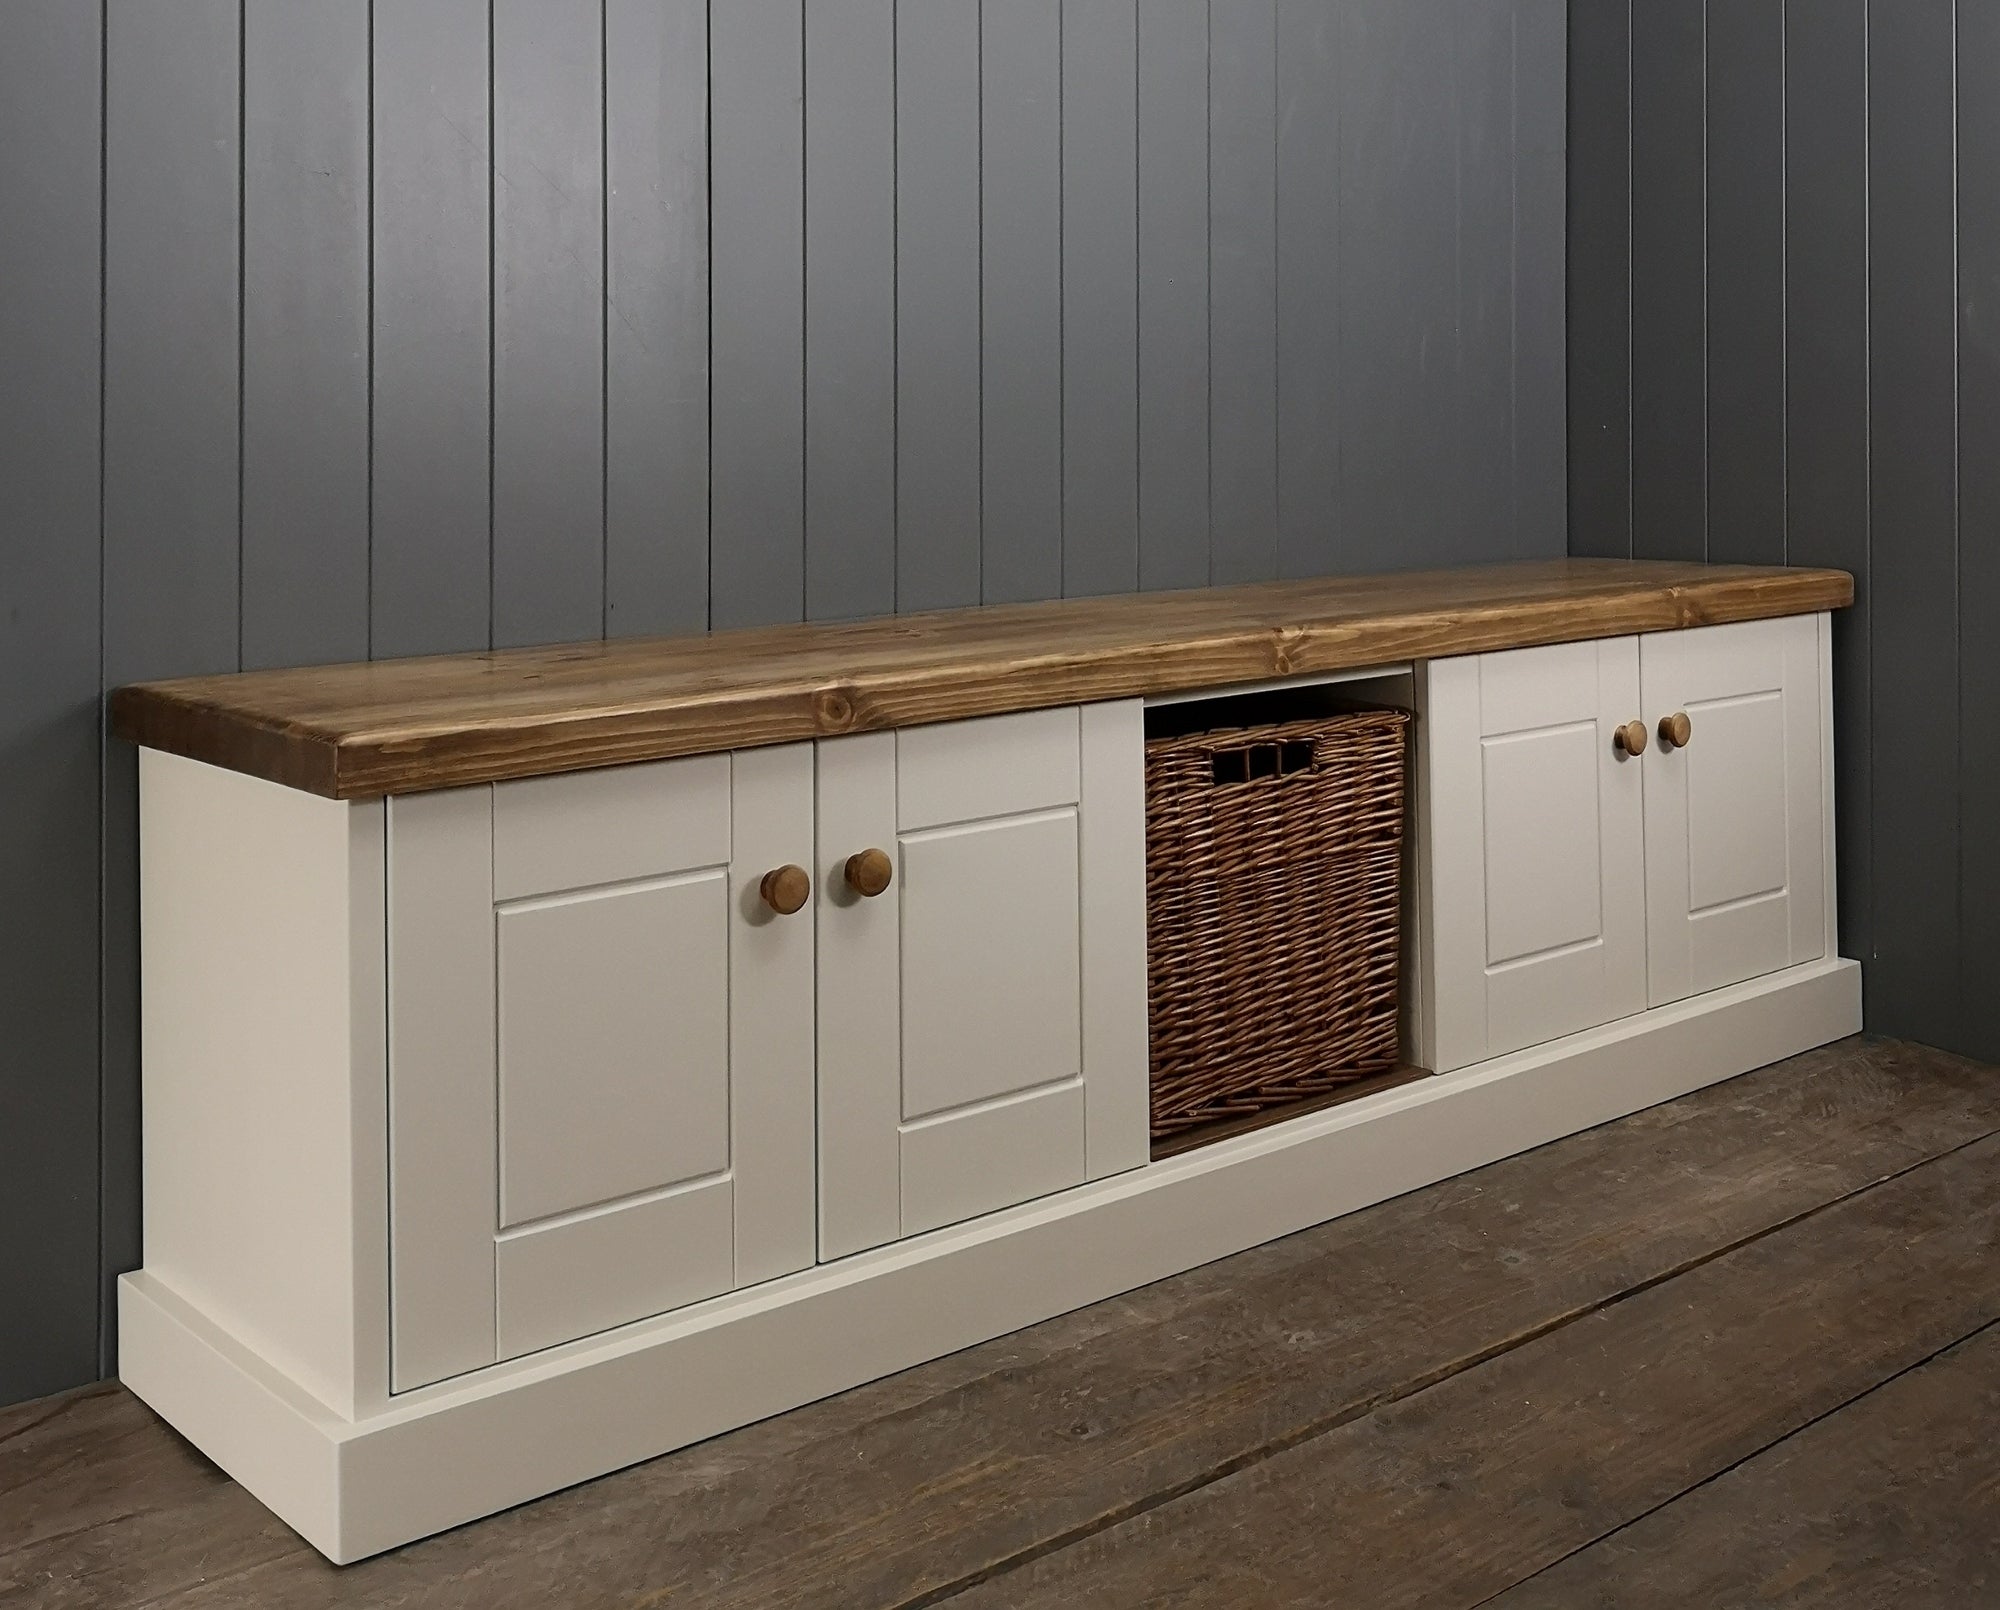 A painted cupboard wicker storage basket and second painted cupboard under an antique pine rustic top.